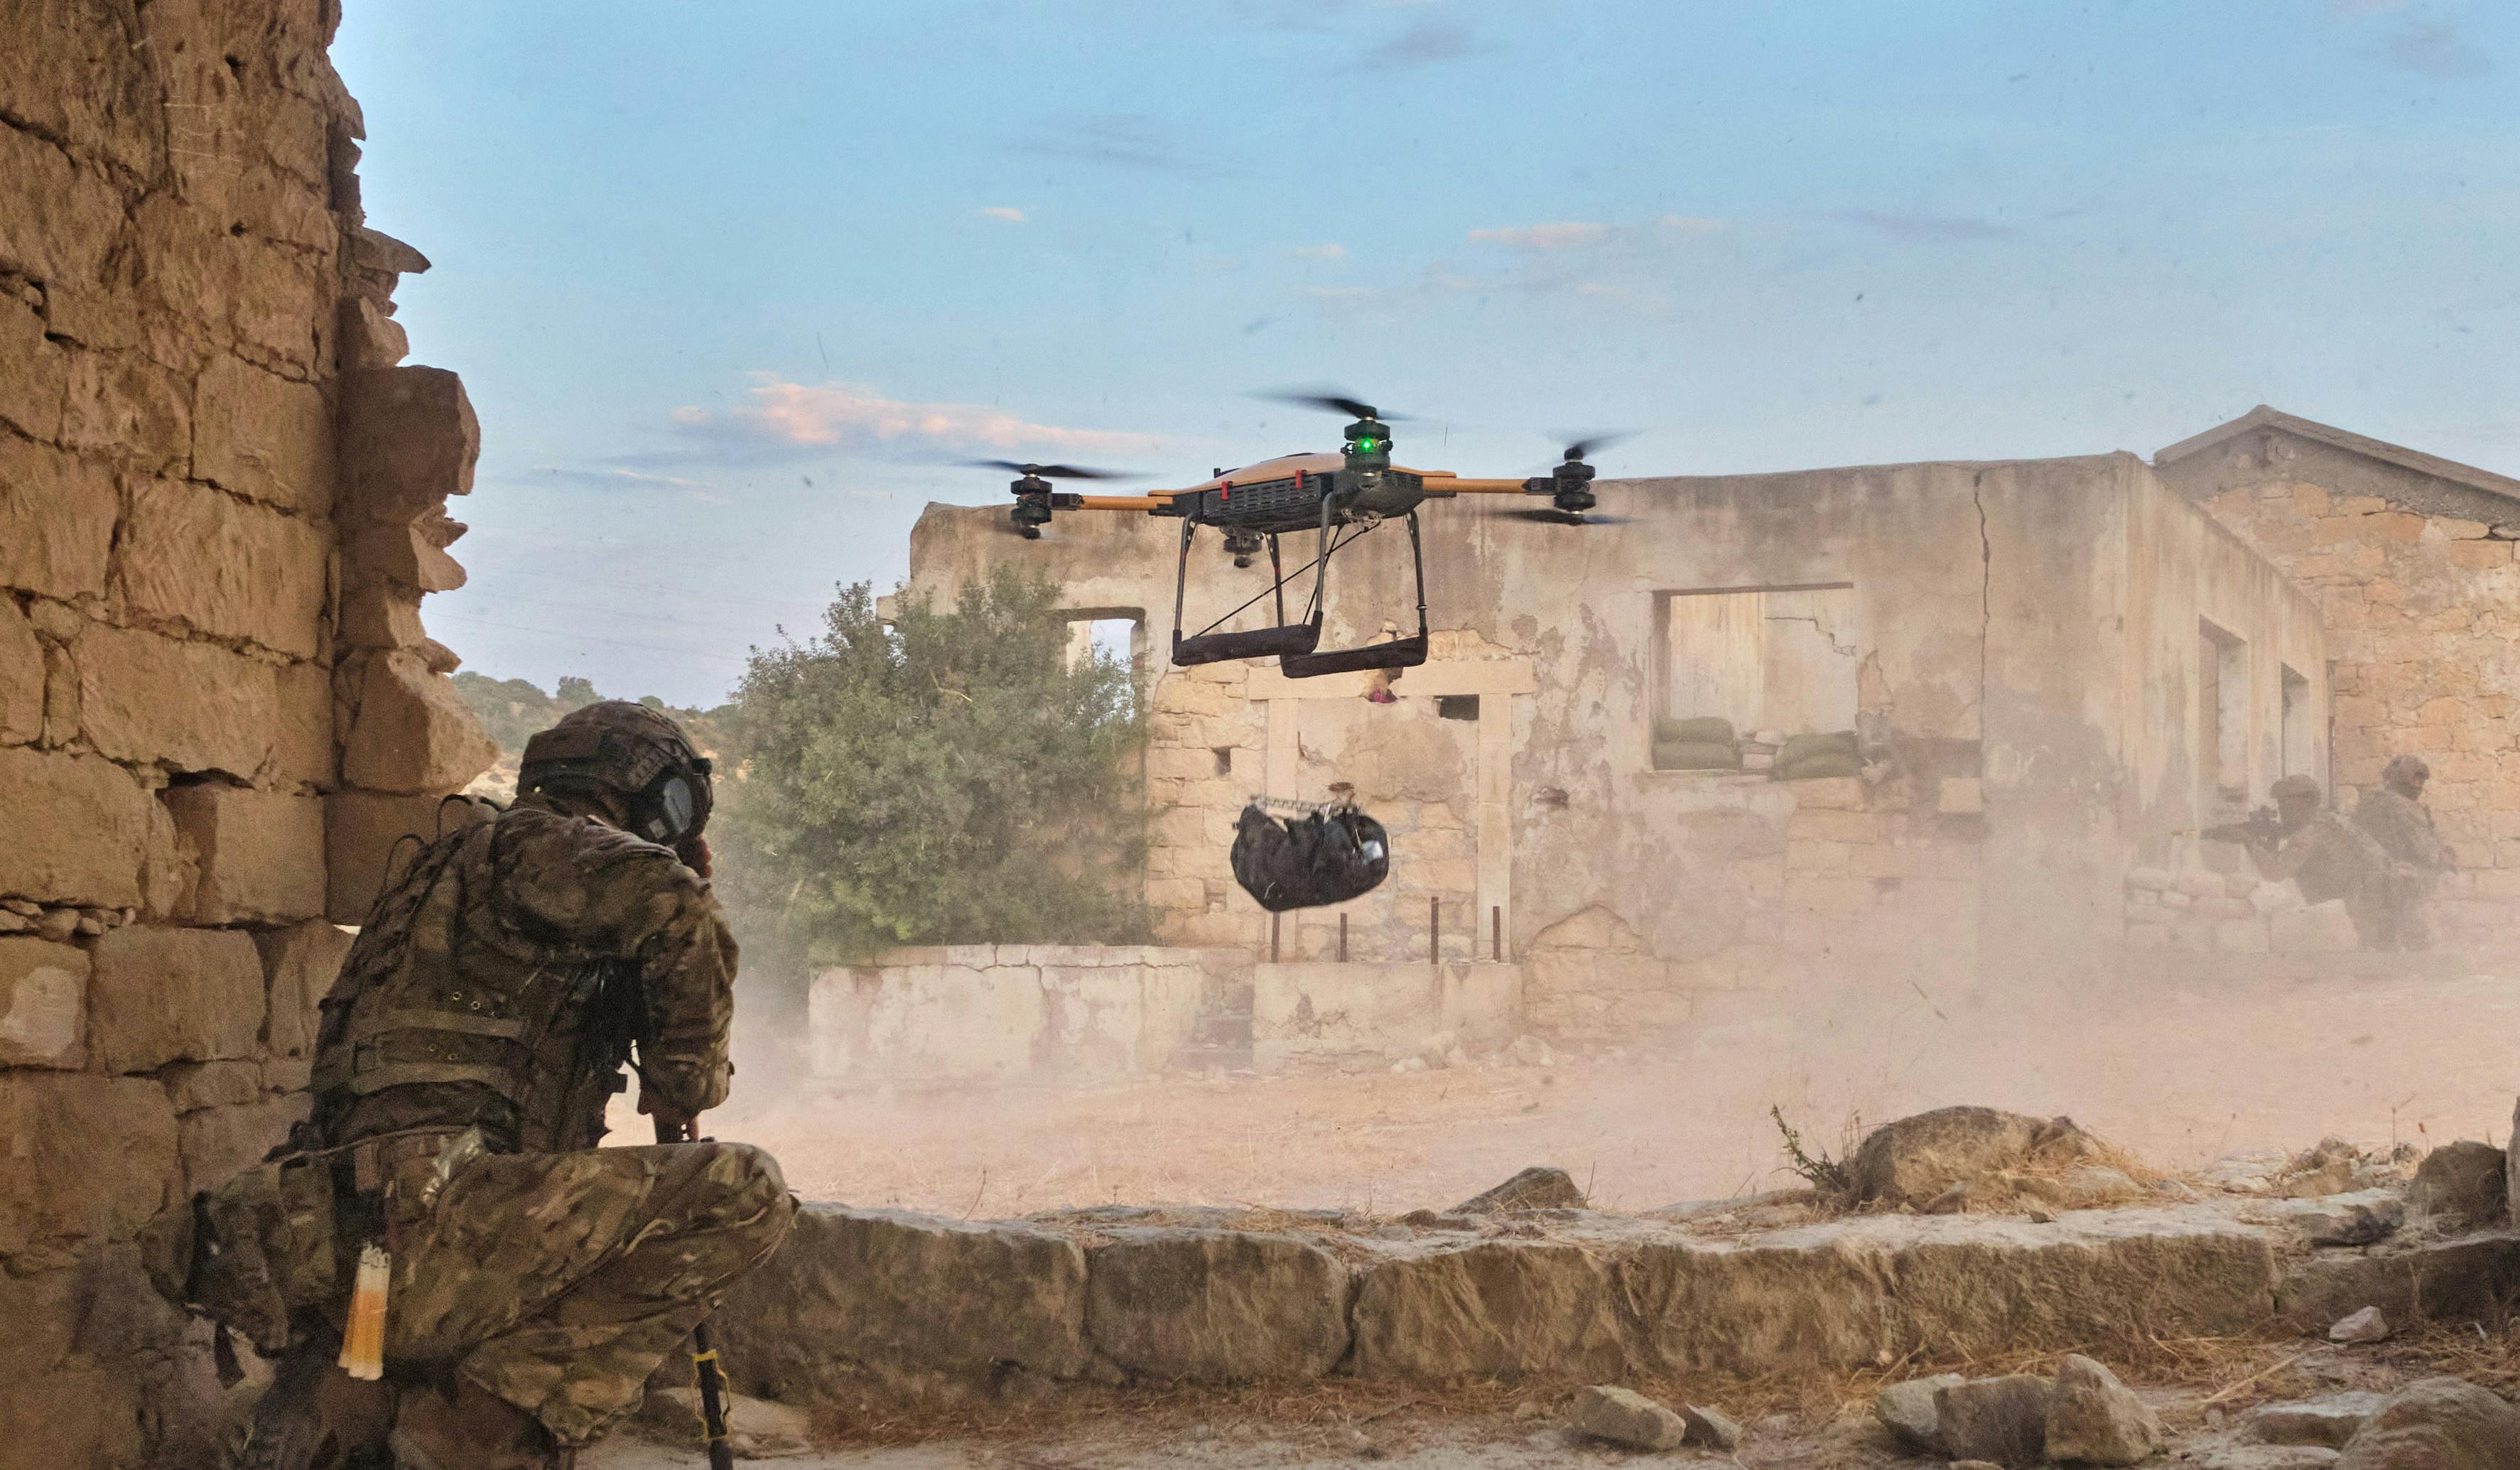 A solider watching a drone carry equipment.